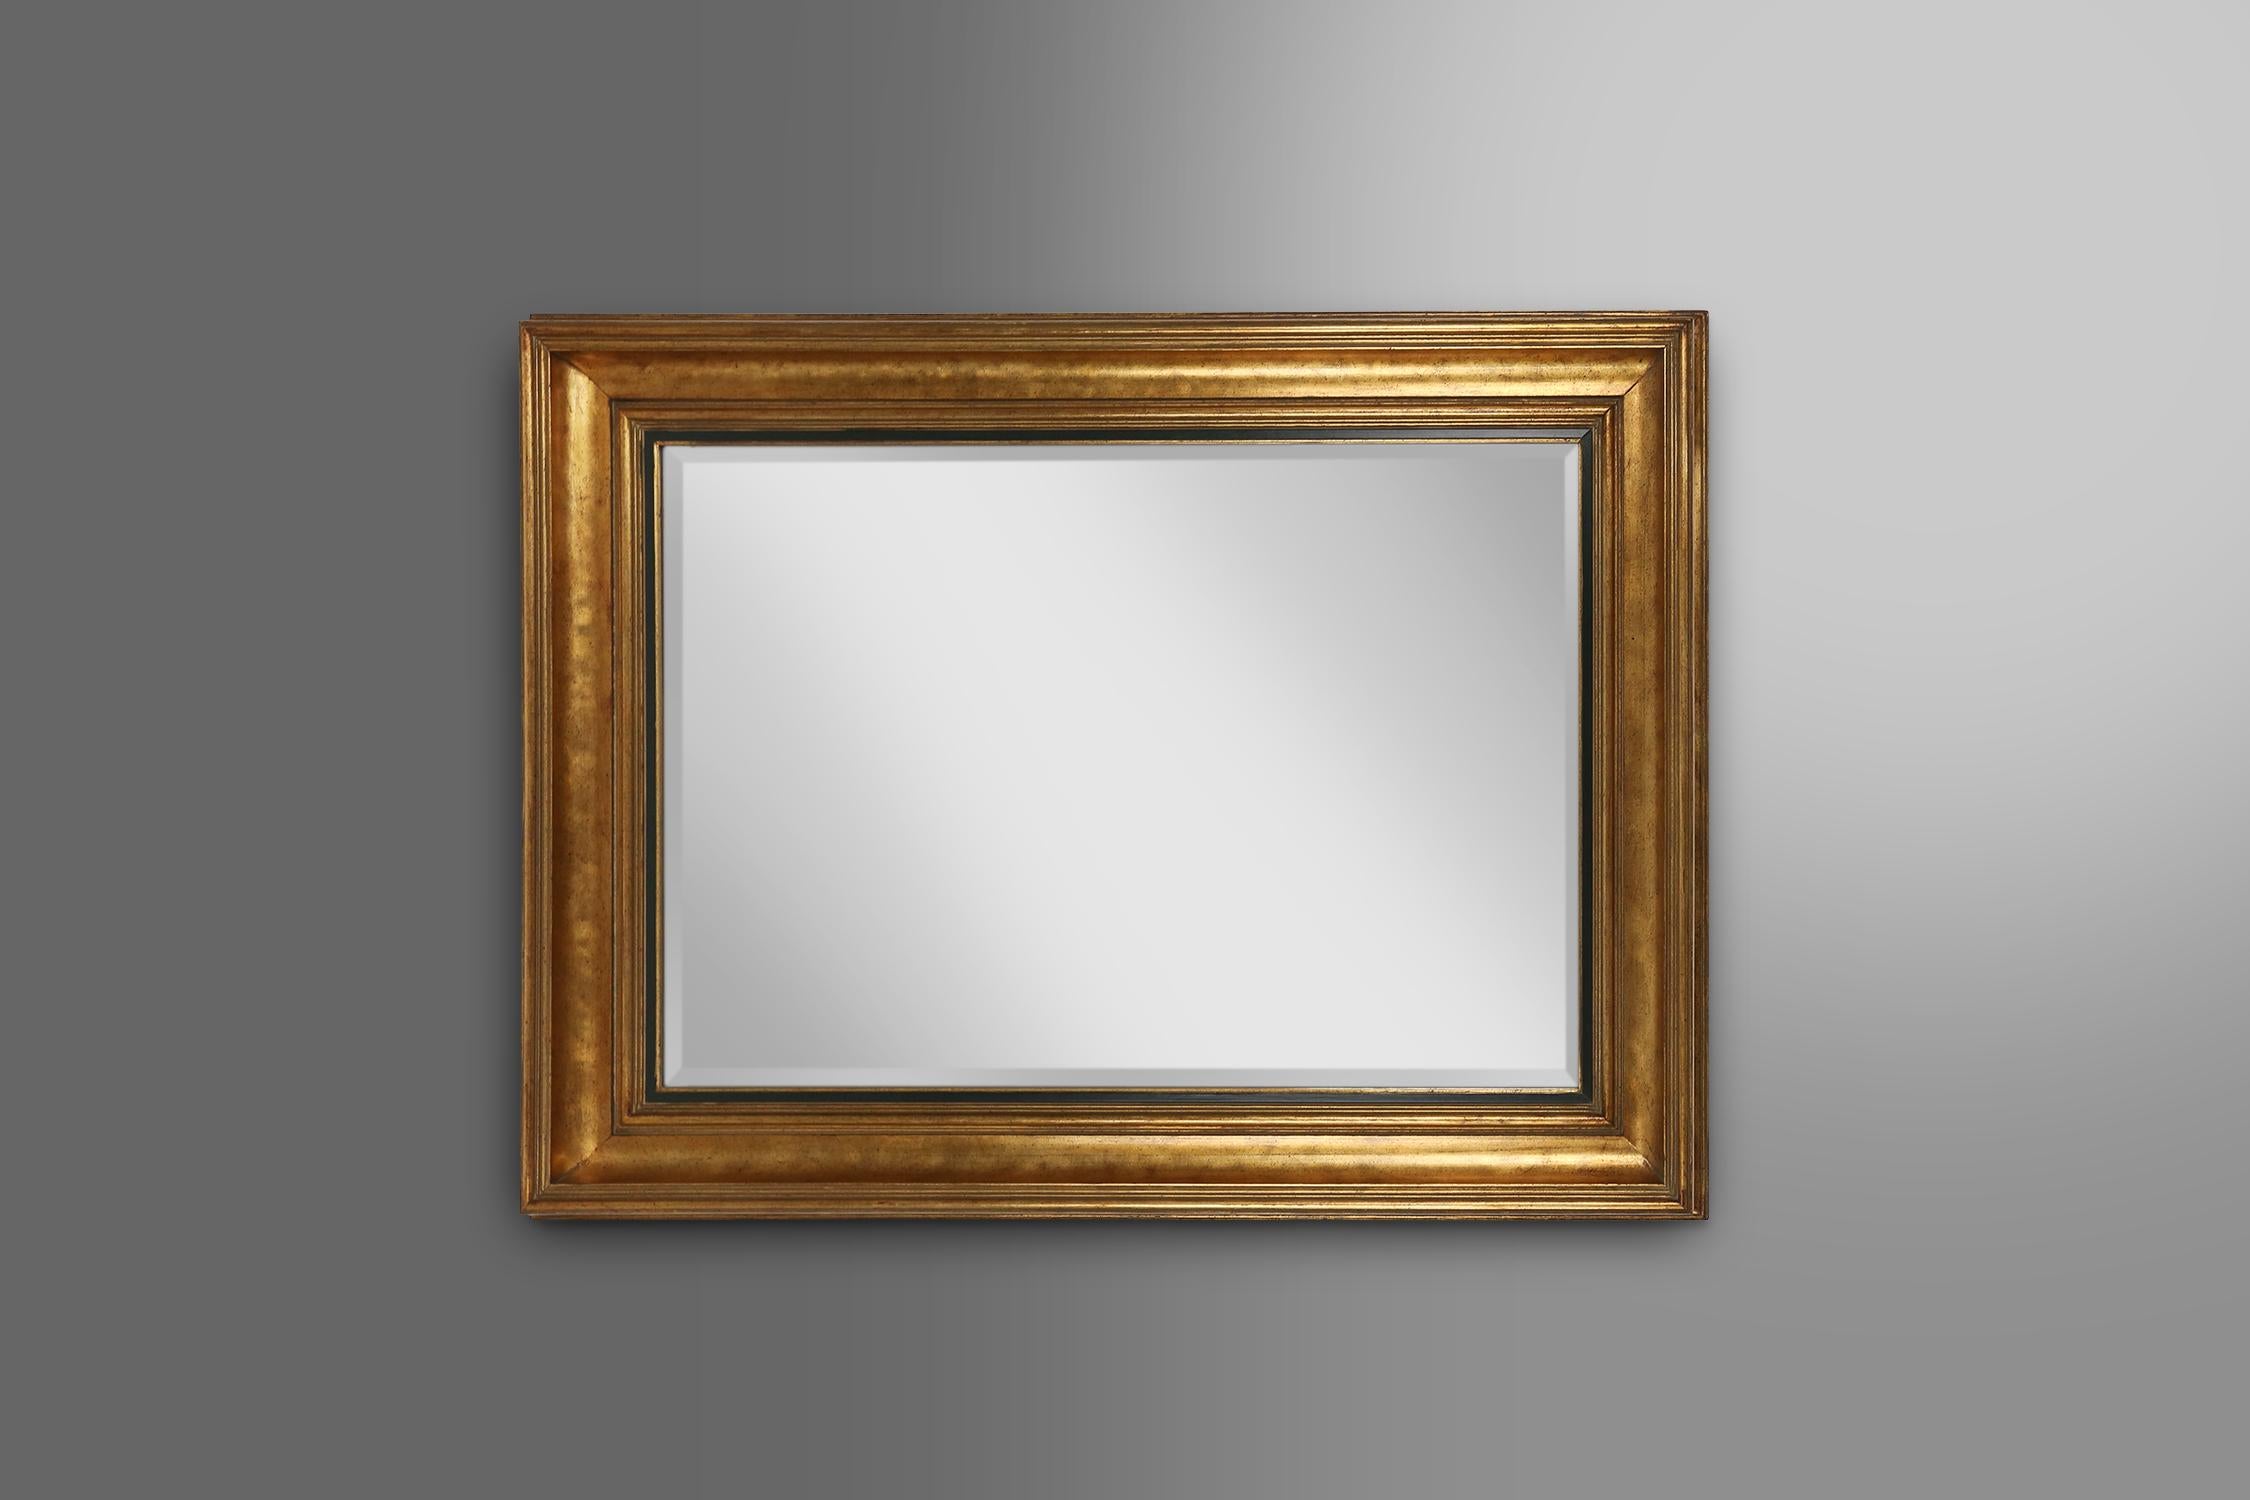 Belgium / 1960 / mirror / Deknudt / wood / mid-century / design / vintage

An elegant designed rectangular shaped mirror by Deknudt in Belgium, around 1960. Crafted in wood and beautifully gilded with an elegant black inner frame. The mirror can be